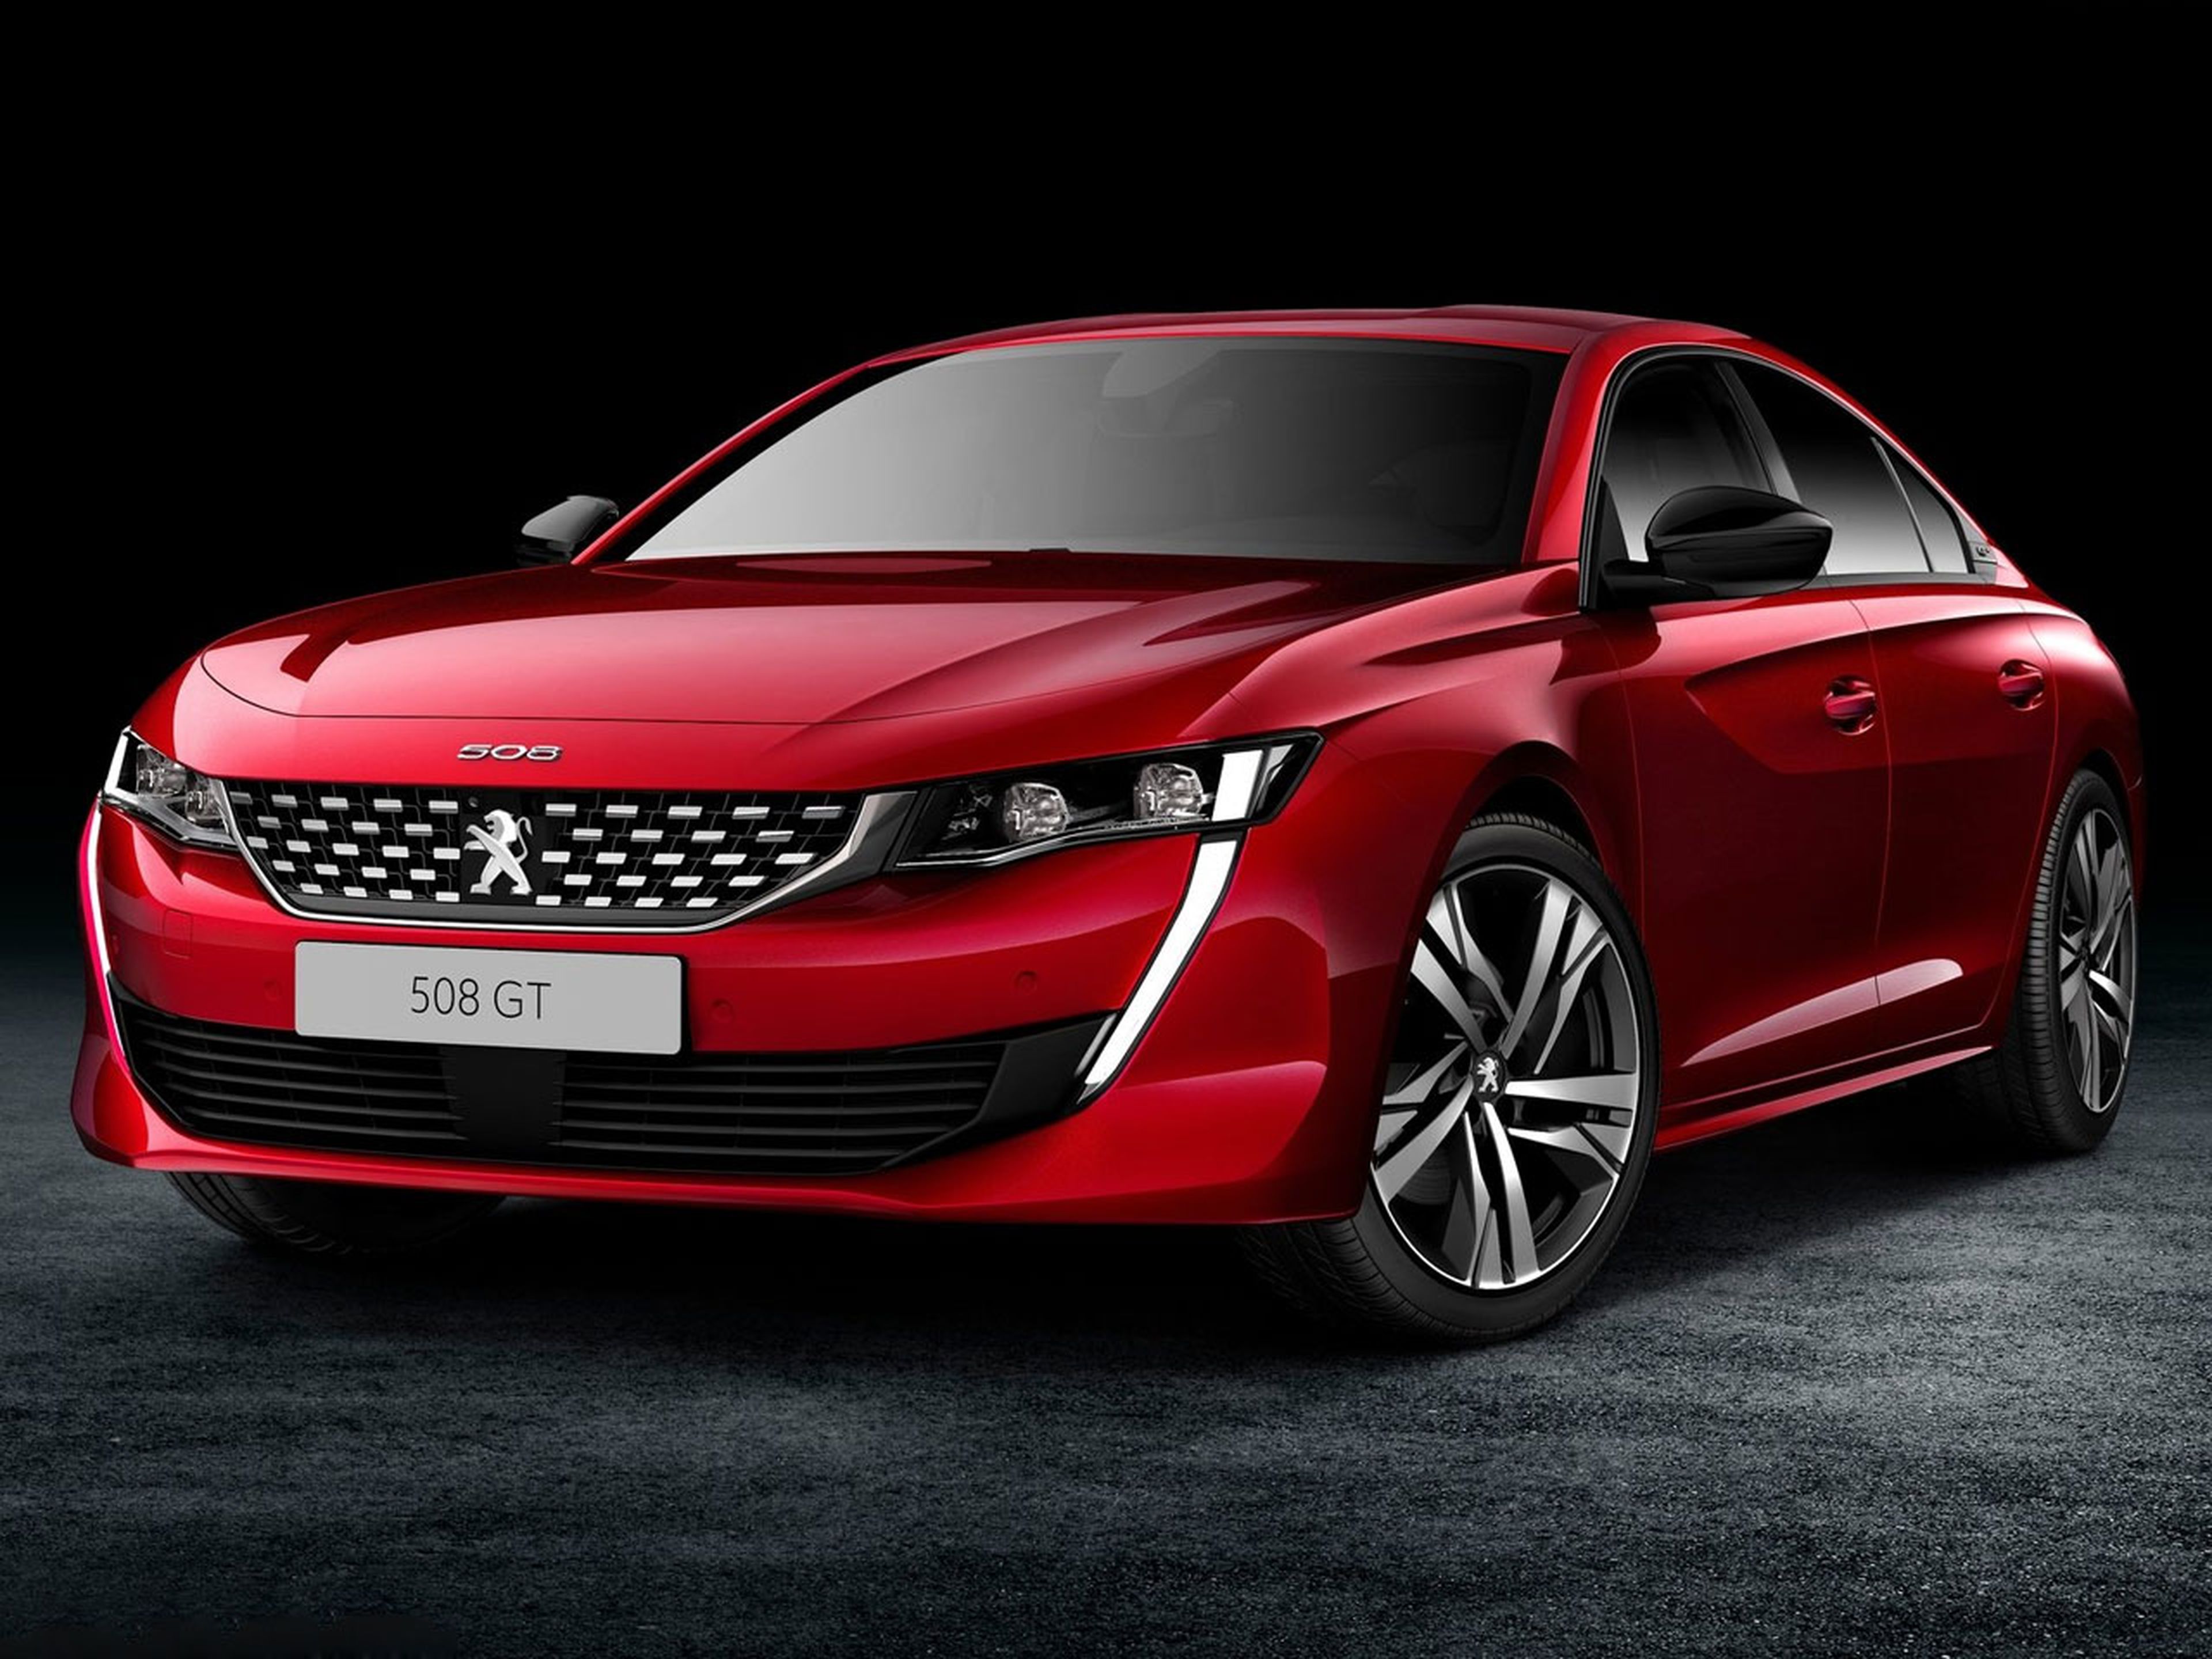 Peugeot-508-2019-Frontal-2